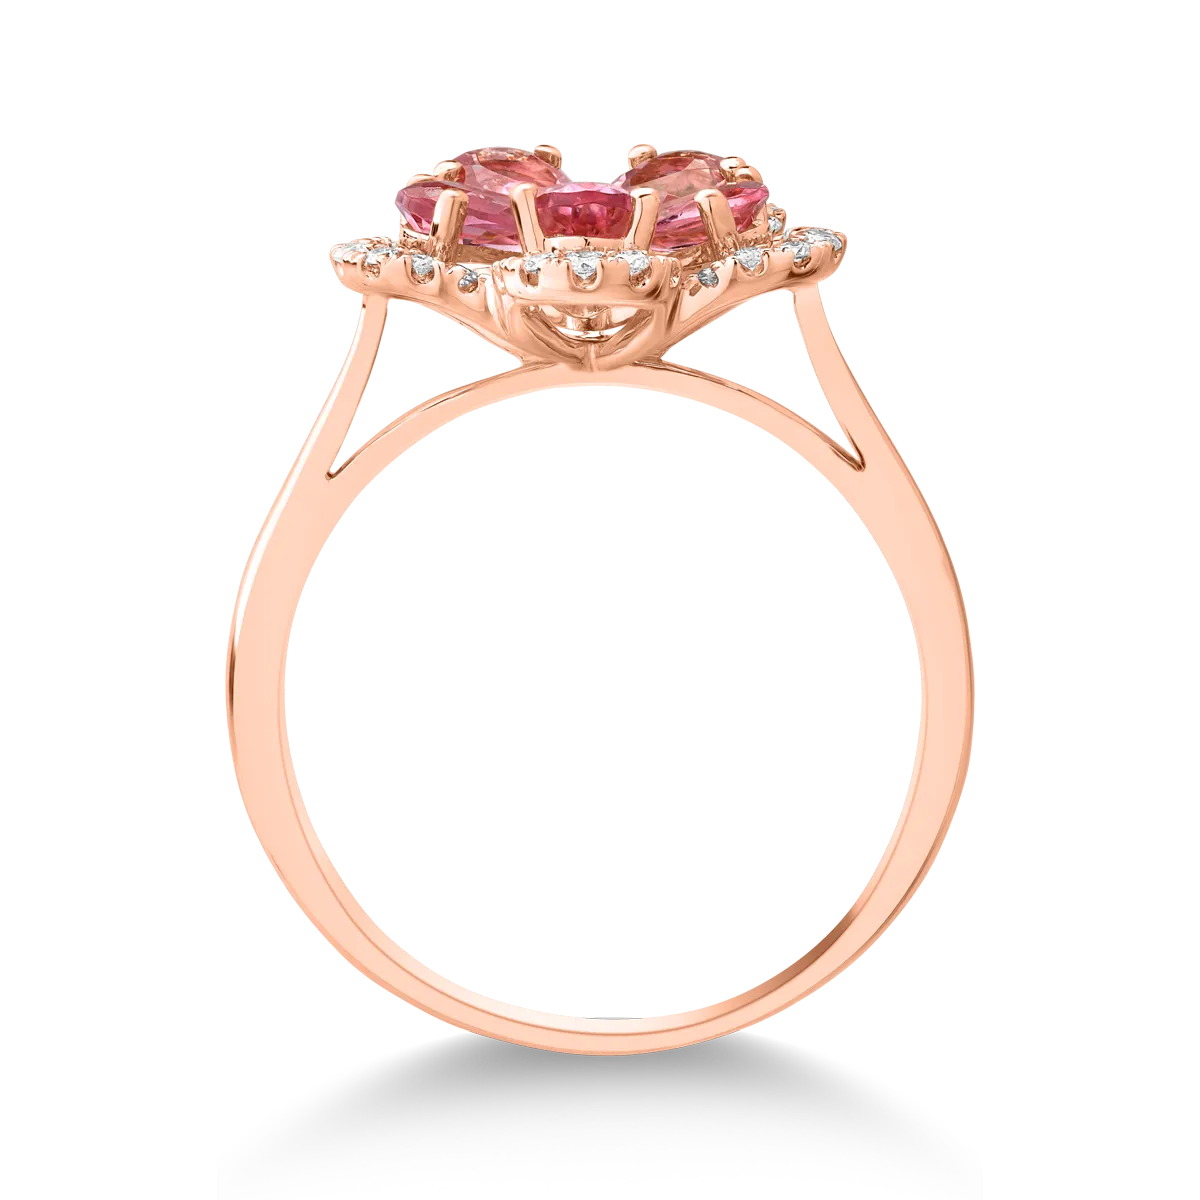 18K rose gold flower ring with 1ct pink tourmalines and 0.15ct diamonds